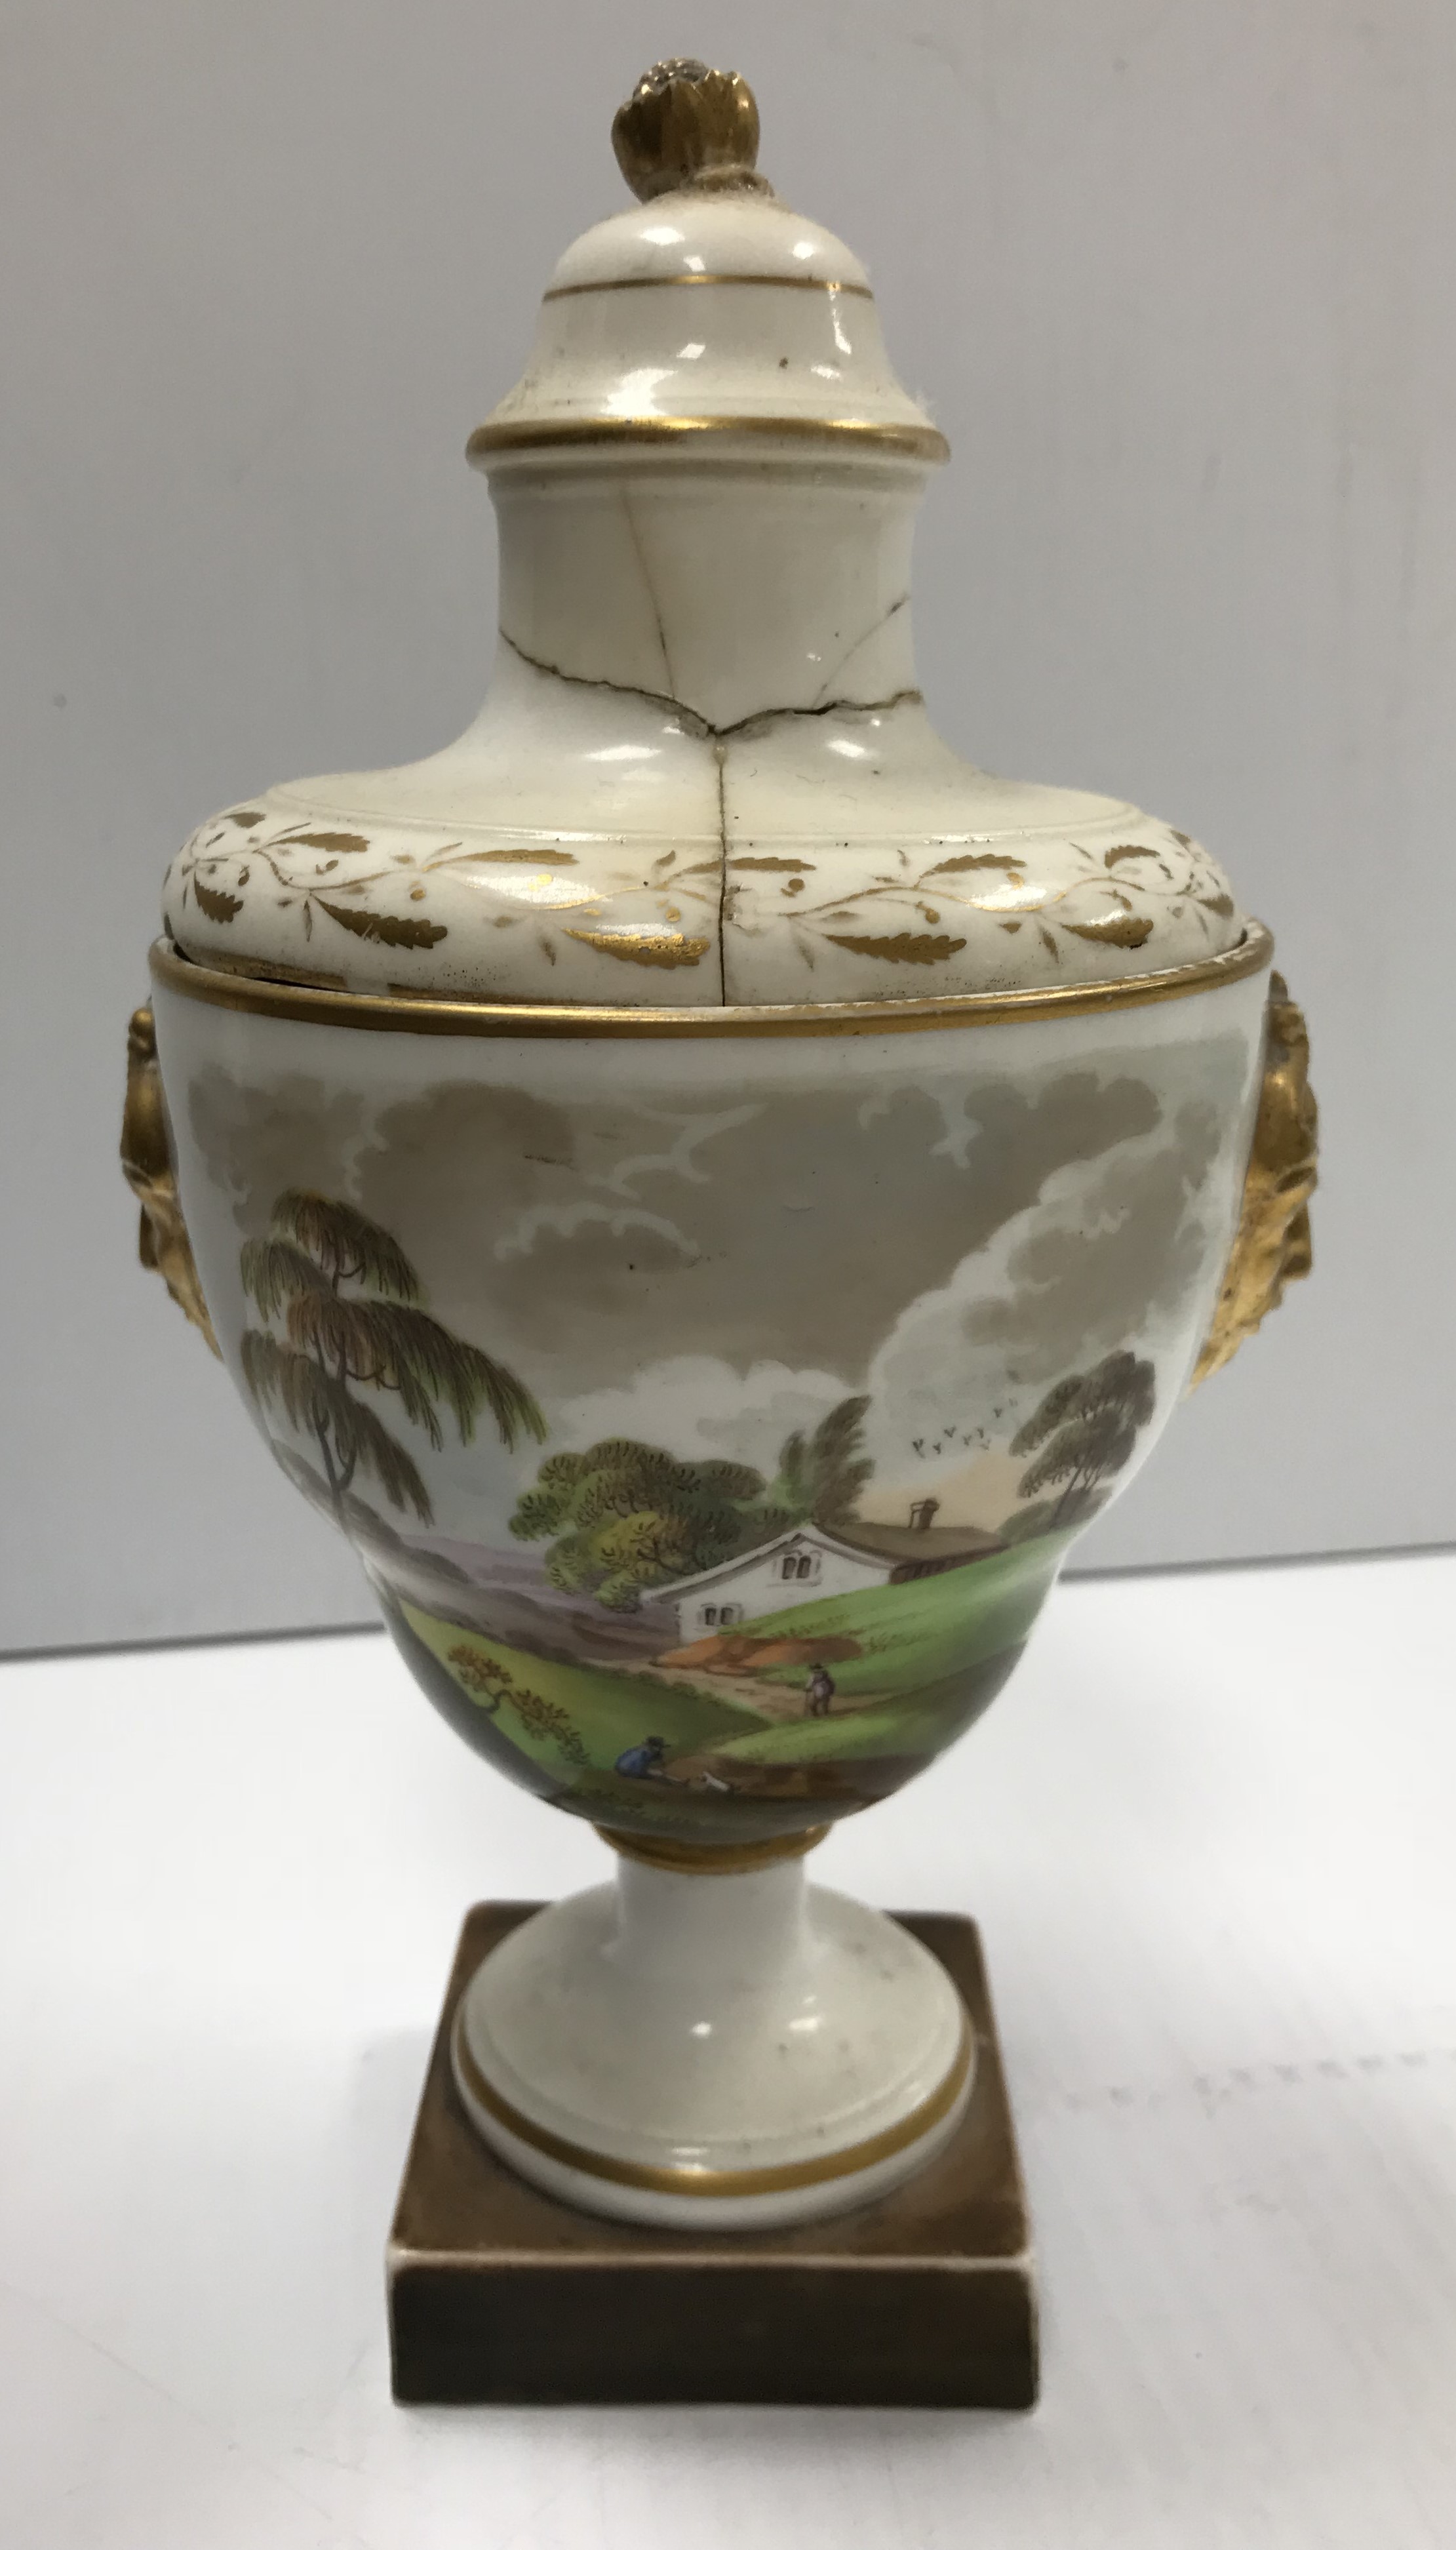 A Job Ridgeway & Sons (circa 1808-14) pair of urns and covers decorated with figures in landscape - Image 6 of 7